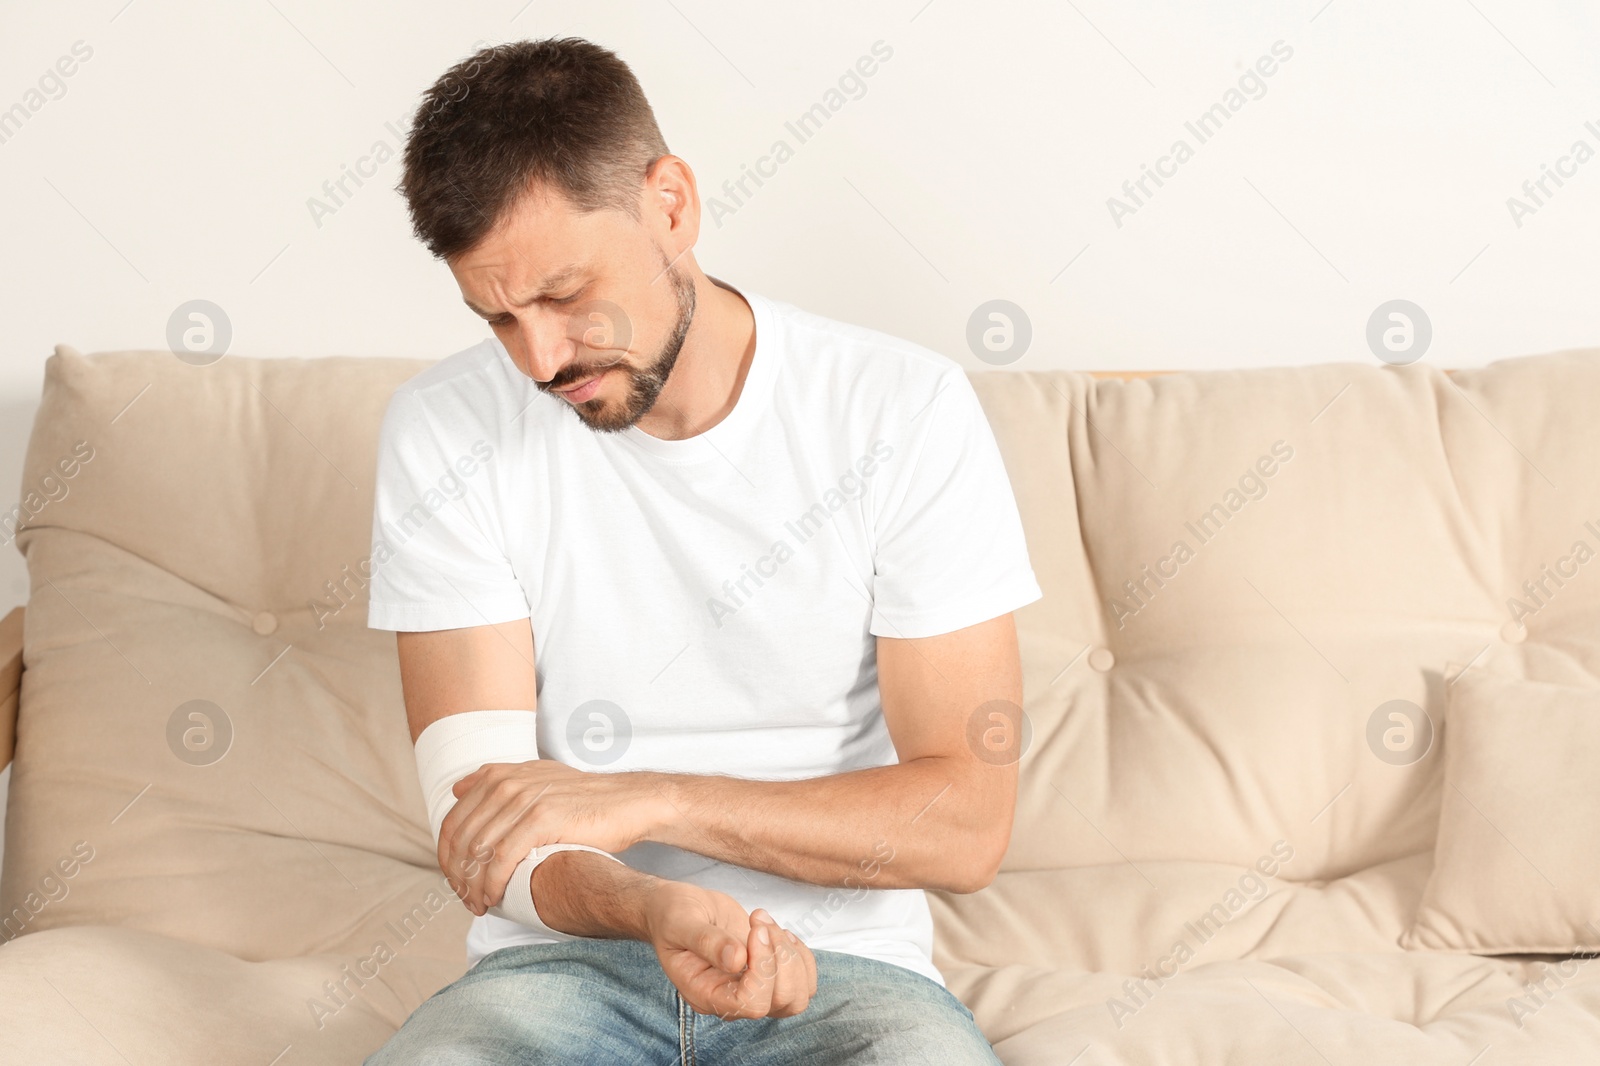 Photo of Man with arm wrapped in medical bandage on sofa indoors